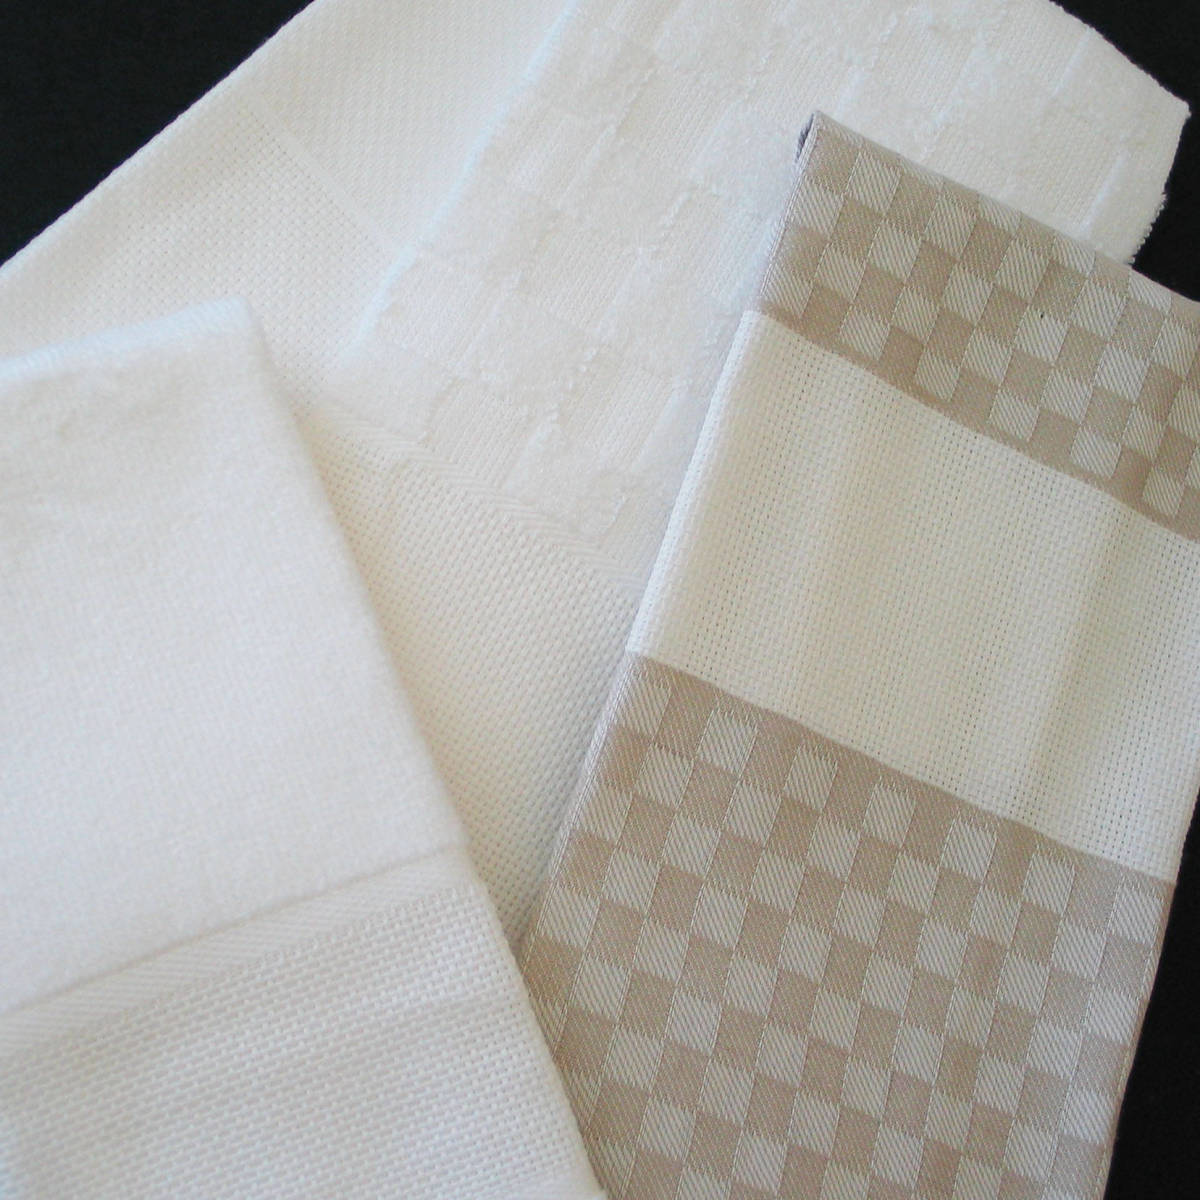 This is a good sample of stitchable towels.